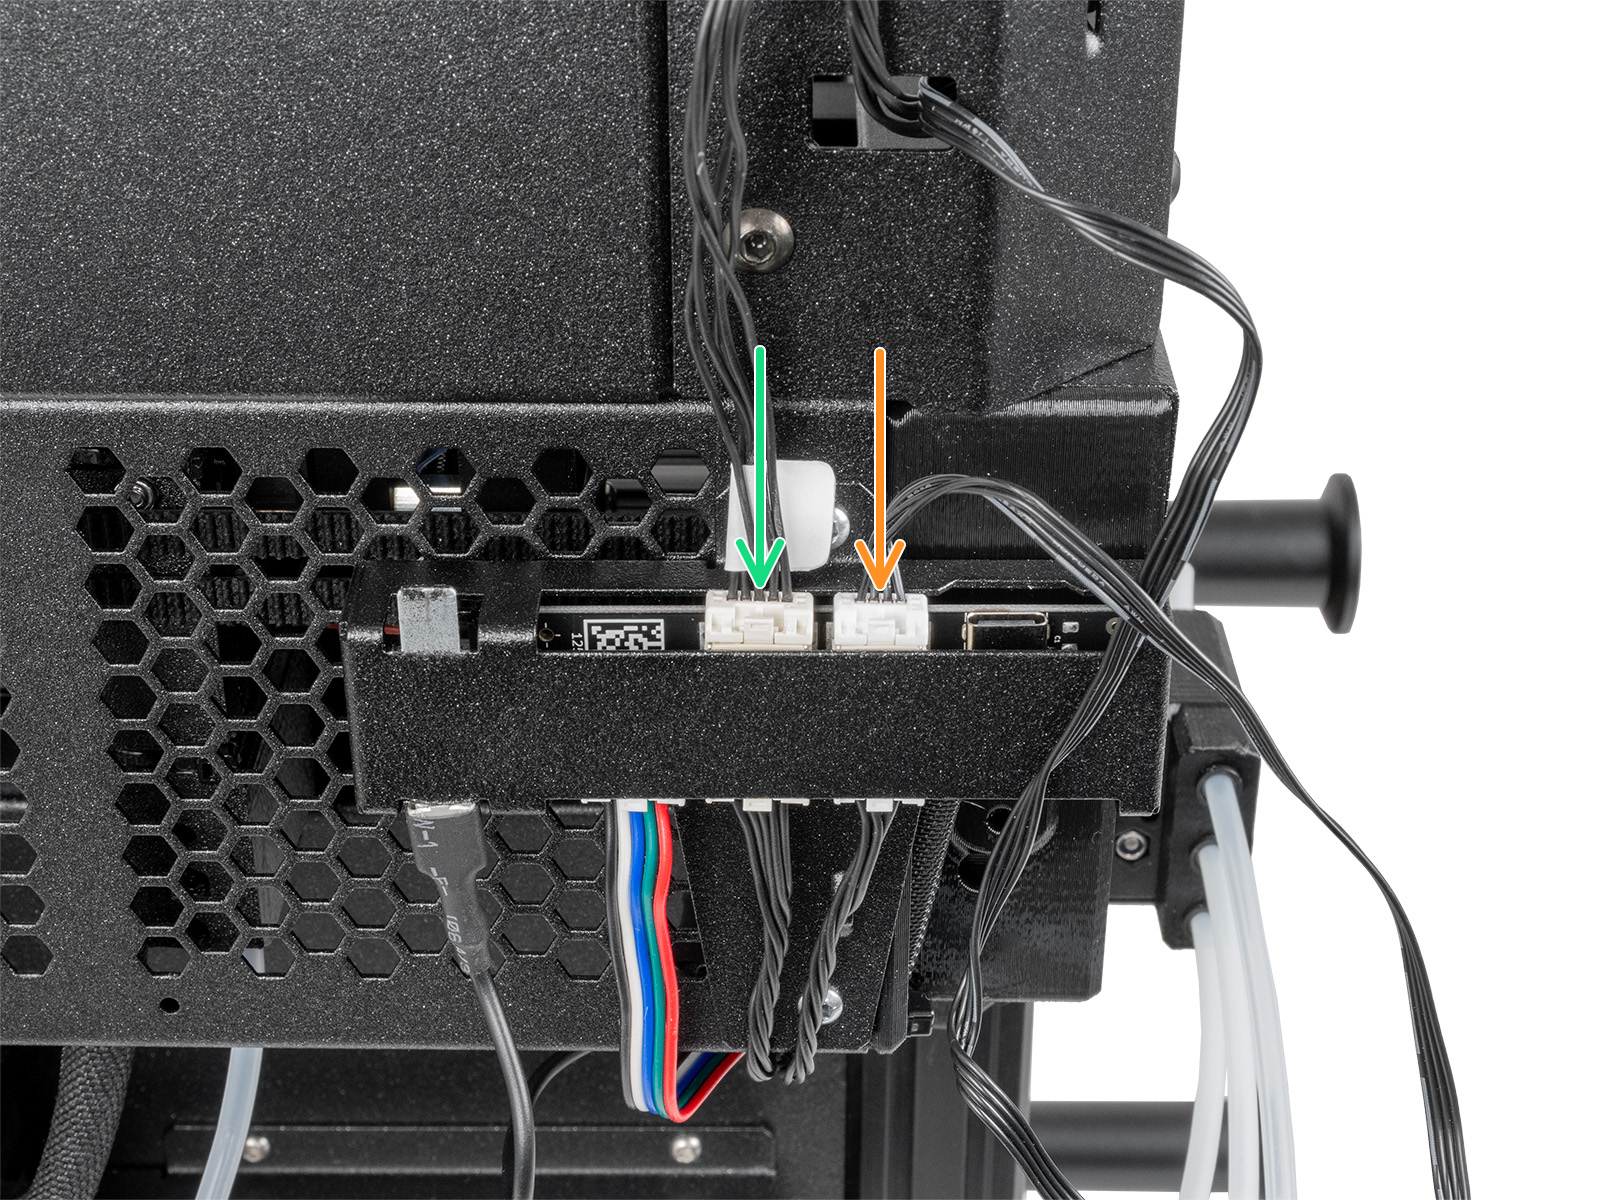 Enclosure cables connecting